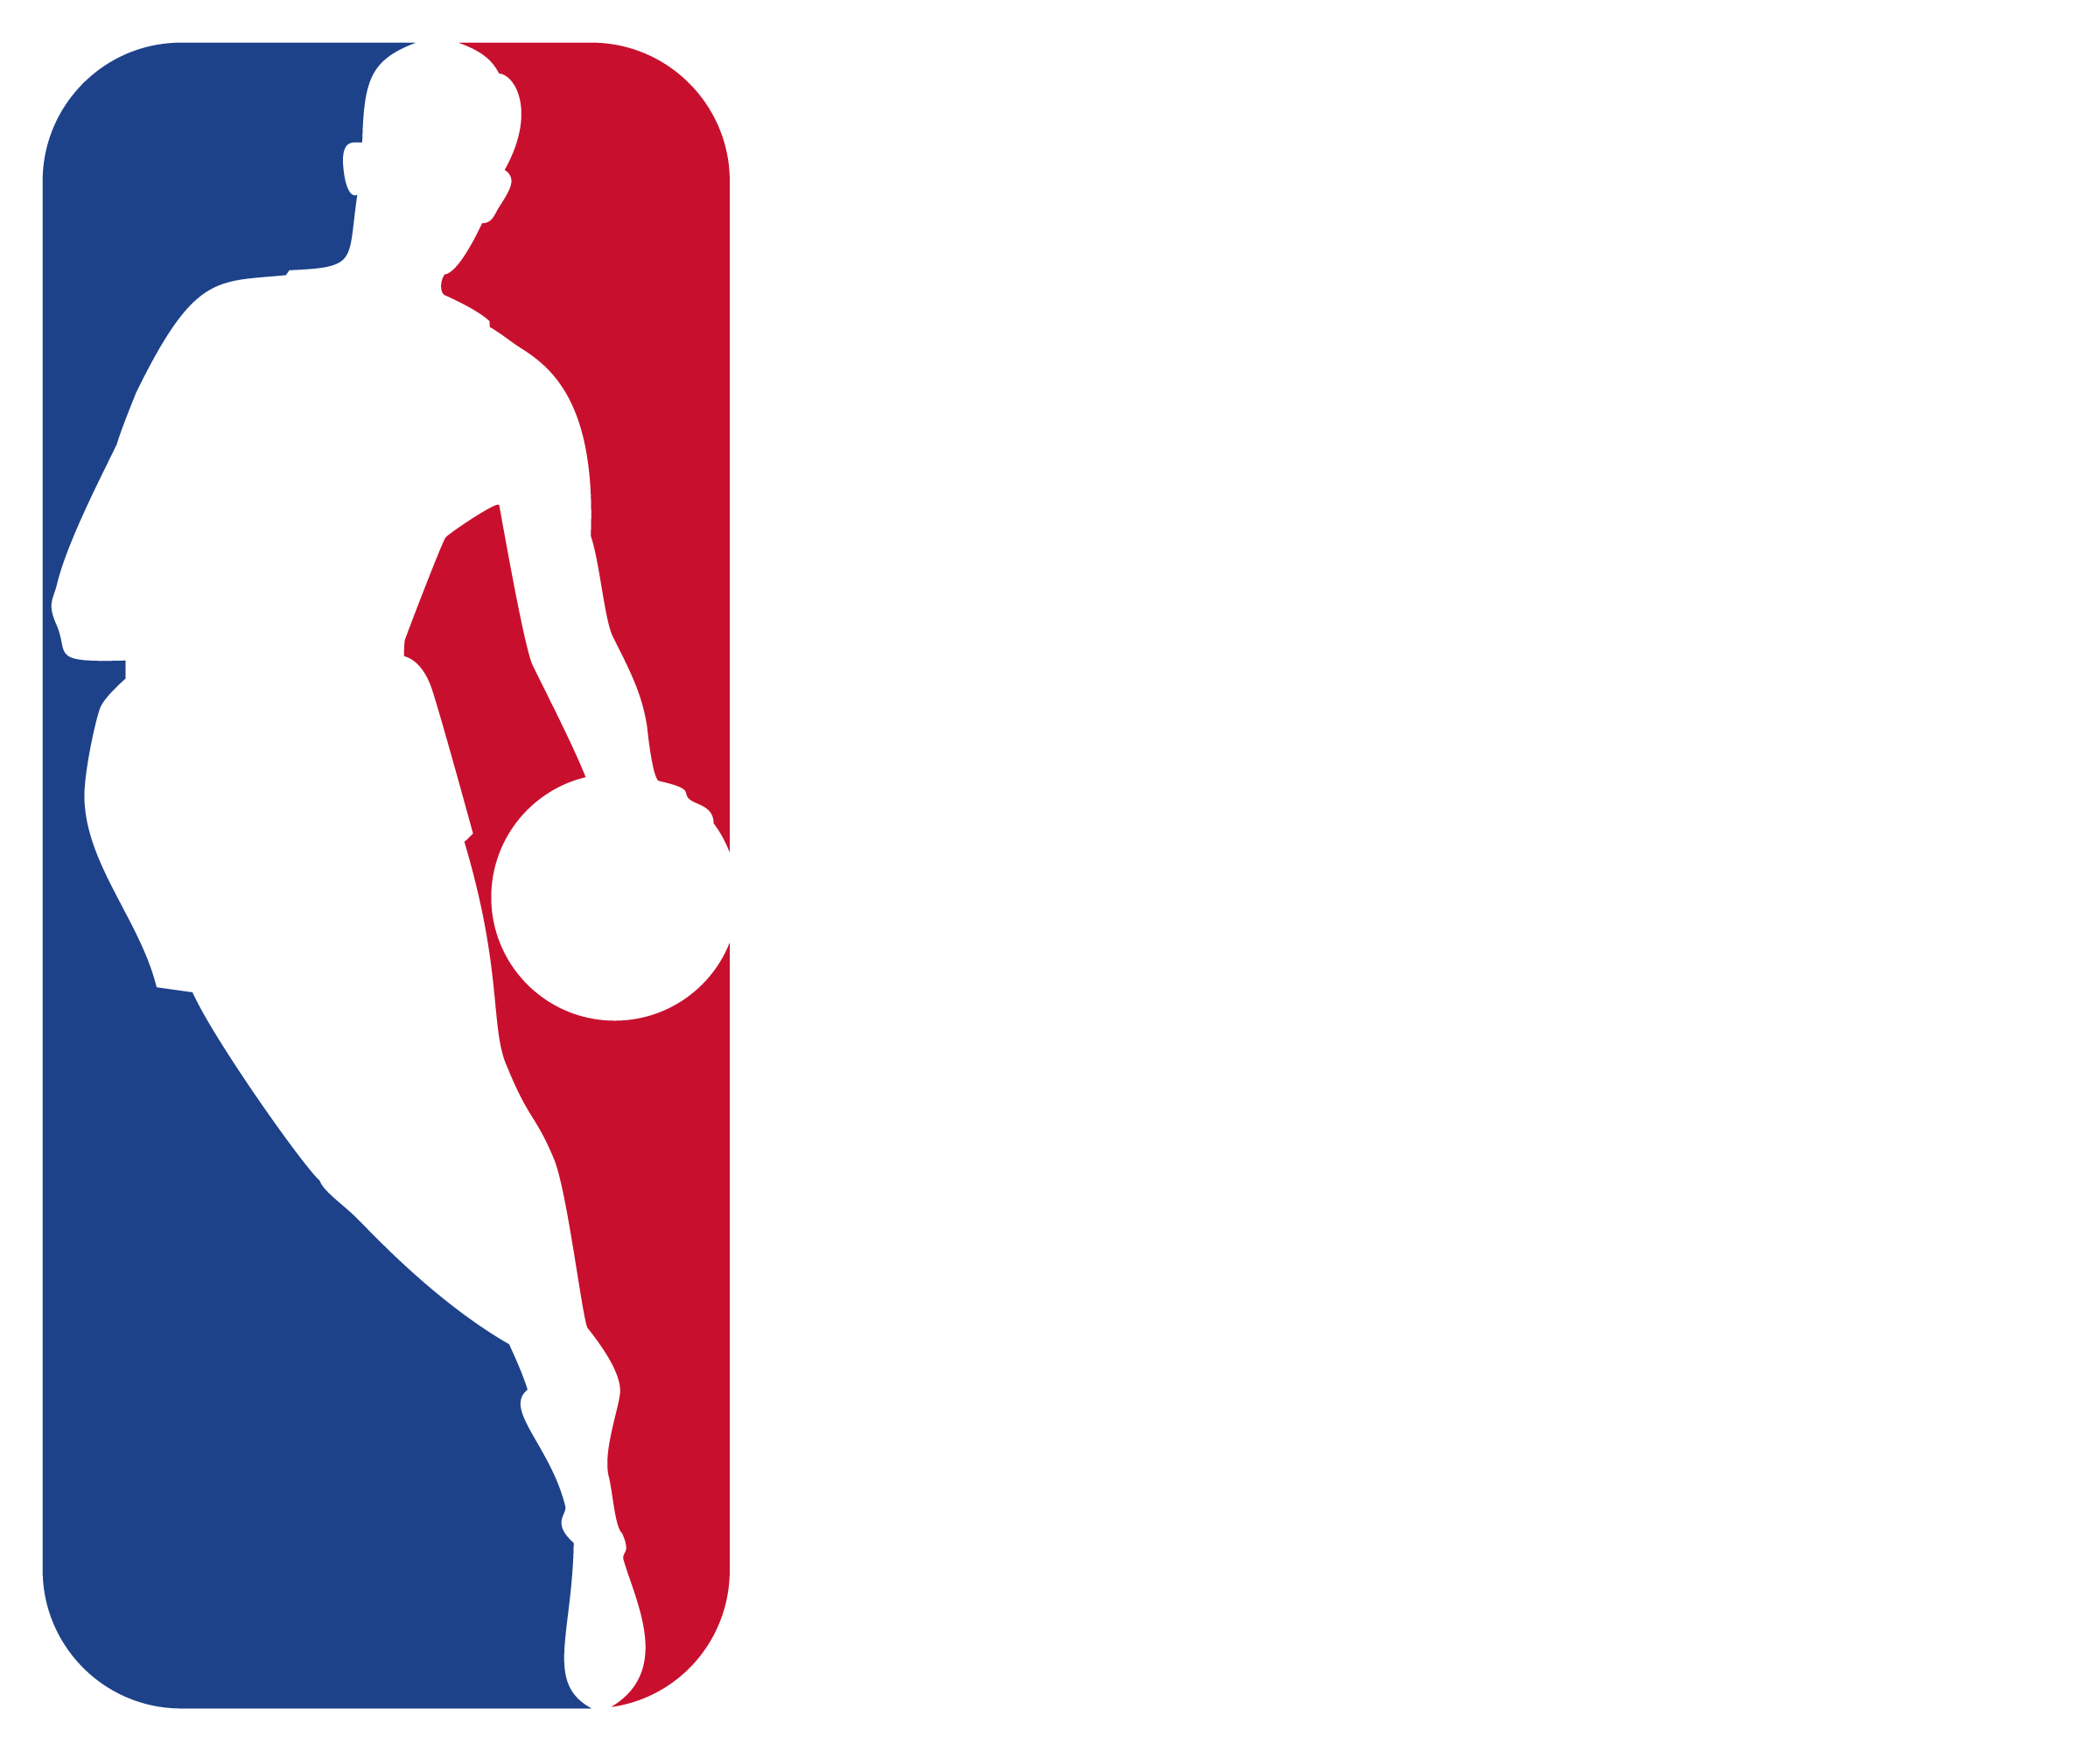 These Exclusive Nba In Vr Broadcasts Require An Nba - Nba Basketball (2400x2001)